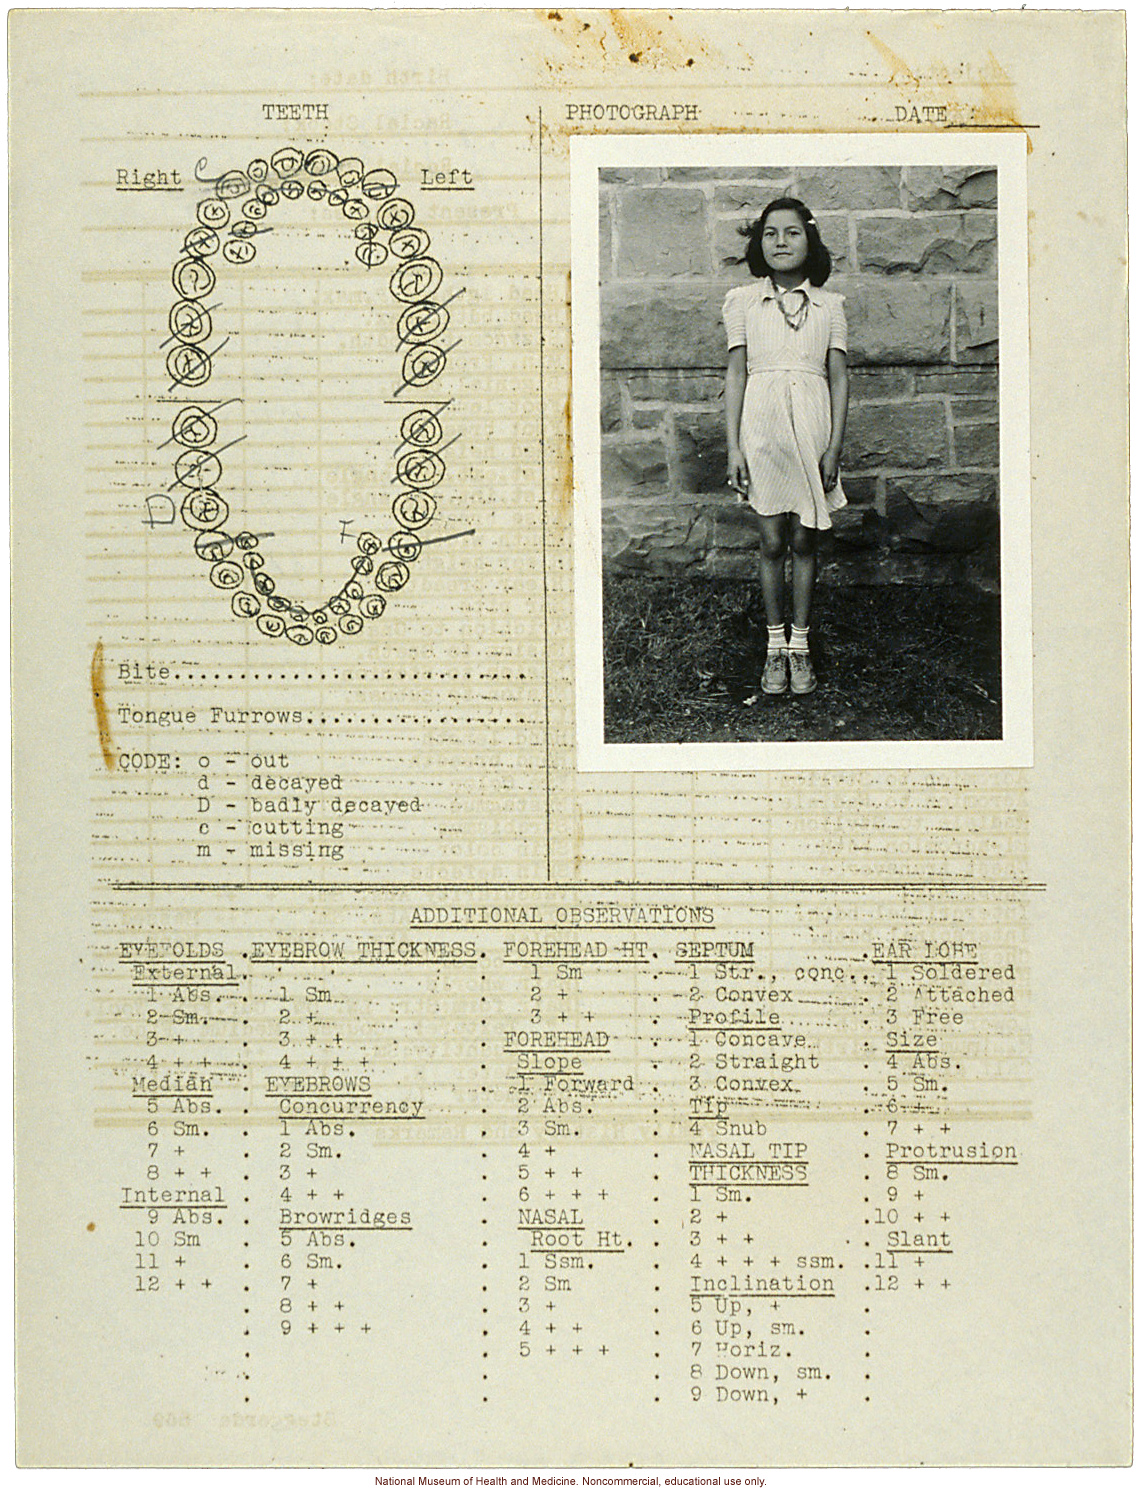 &quote;Growing Series&quote; of Navajo Female age 4-11, Fort Defiance, Arizona (anthropometry, dental charts, and photographs)